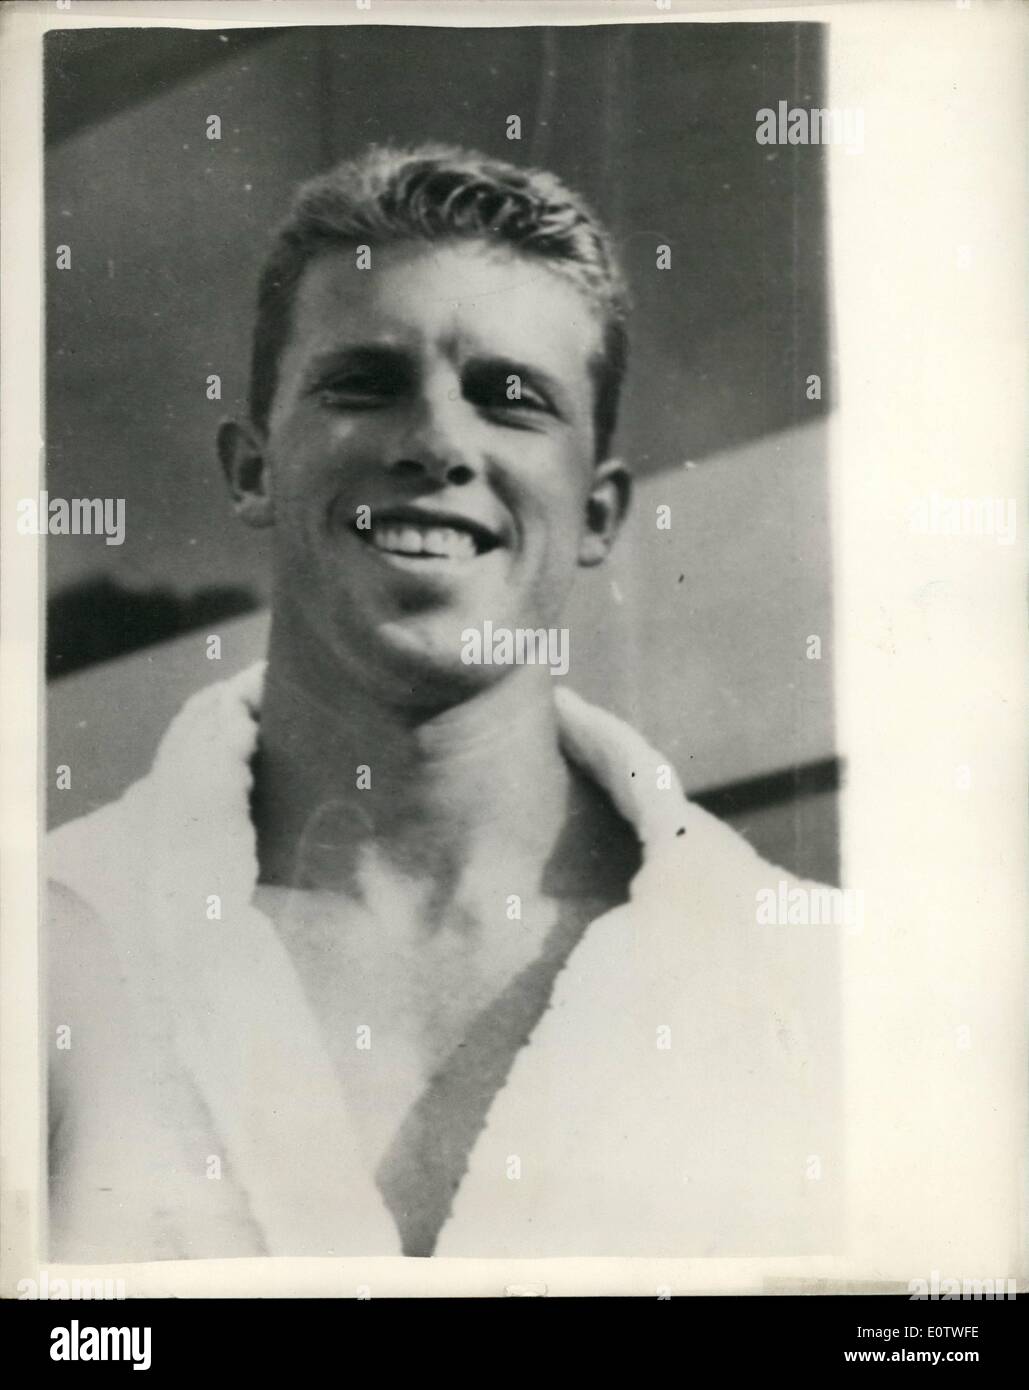 Aug. 08, 1960 - Olympic Games In Rome American Diver Wins Gold Medal: Gary Tobian of America won a Gold Medal in Rome today, when he took the Men's 3-metres diving title. Photo shows Gary Tobian pictured after his Gold Medal win in Rome today. Stock Photo